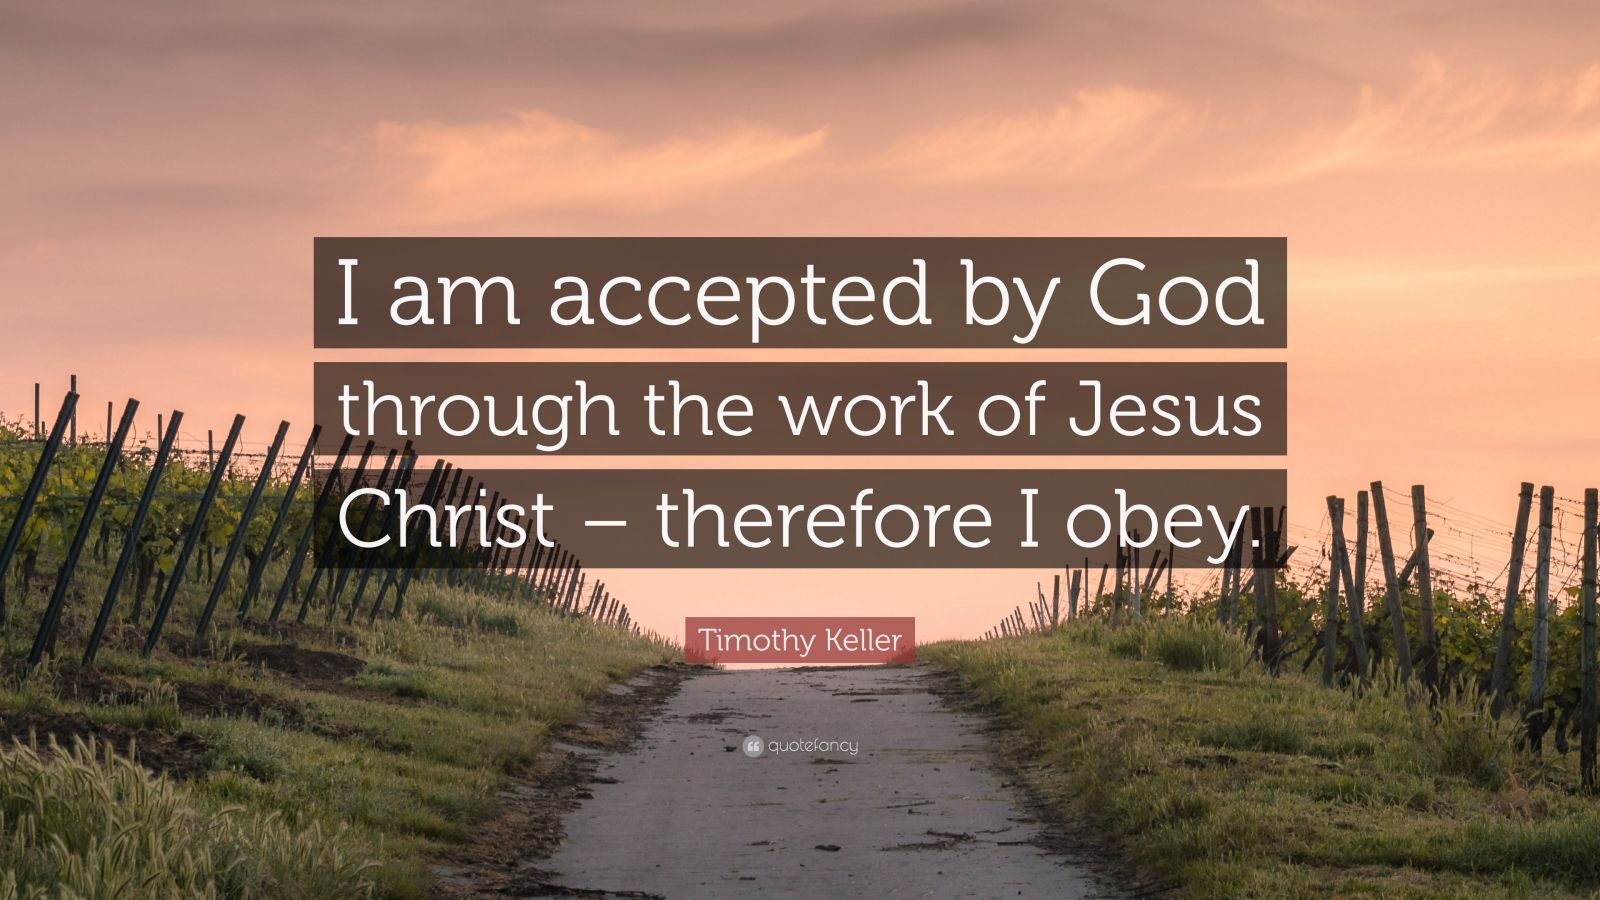 Timothy Keller Quote: “I am accepted by God through the work of Jesus ...